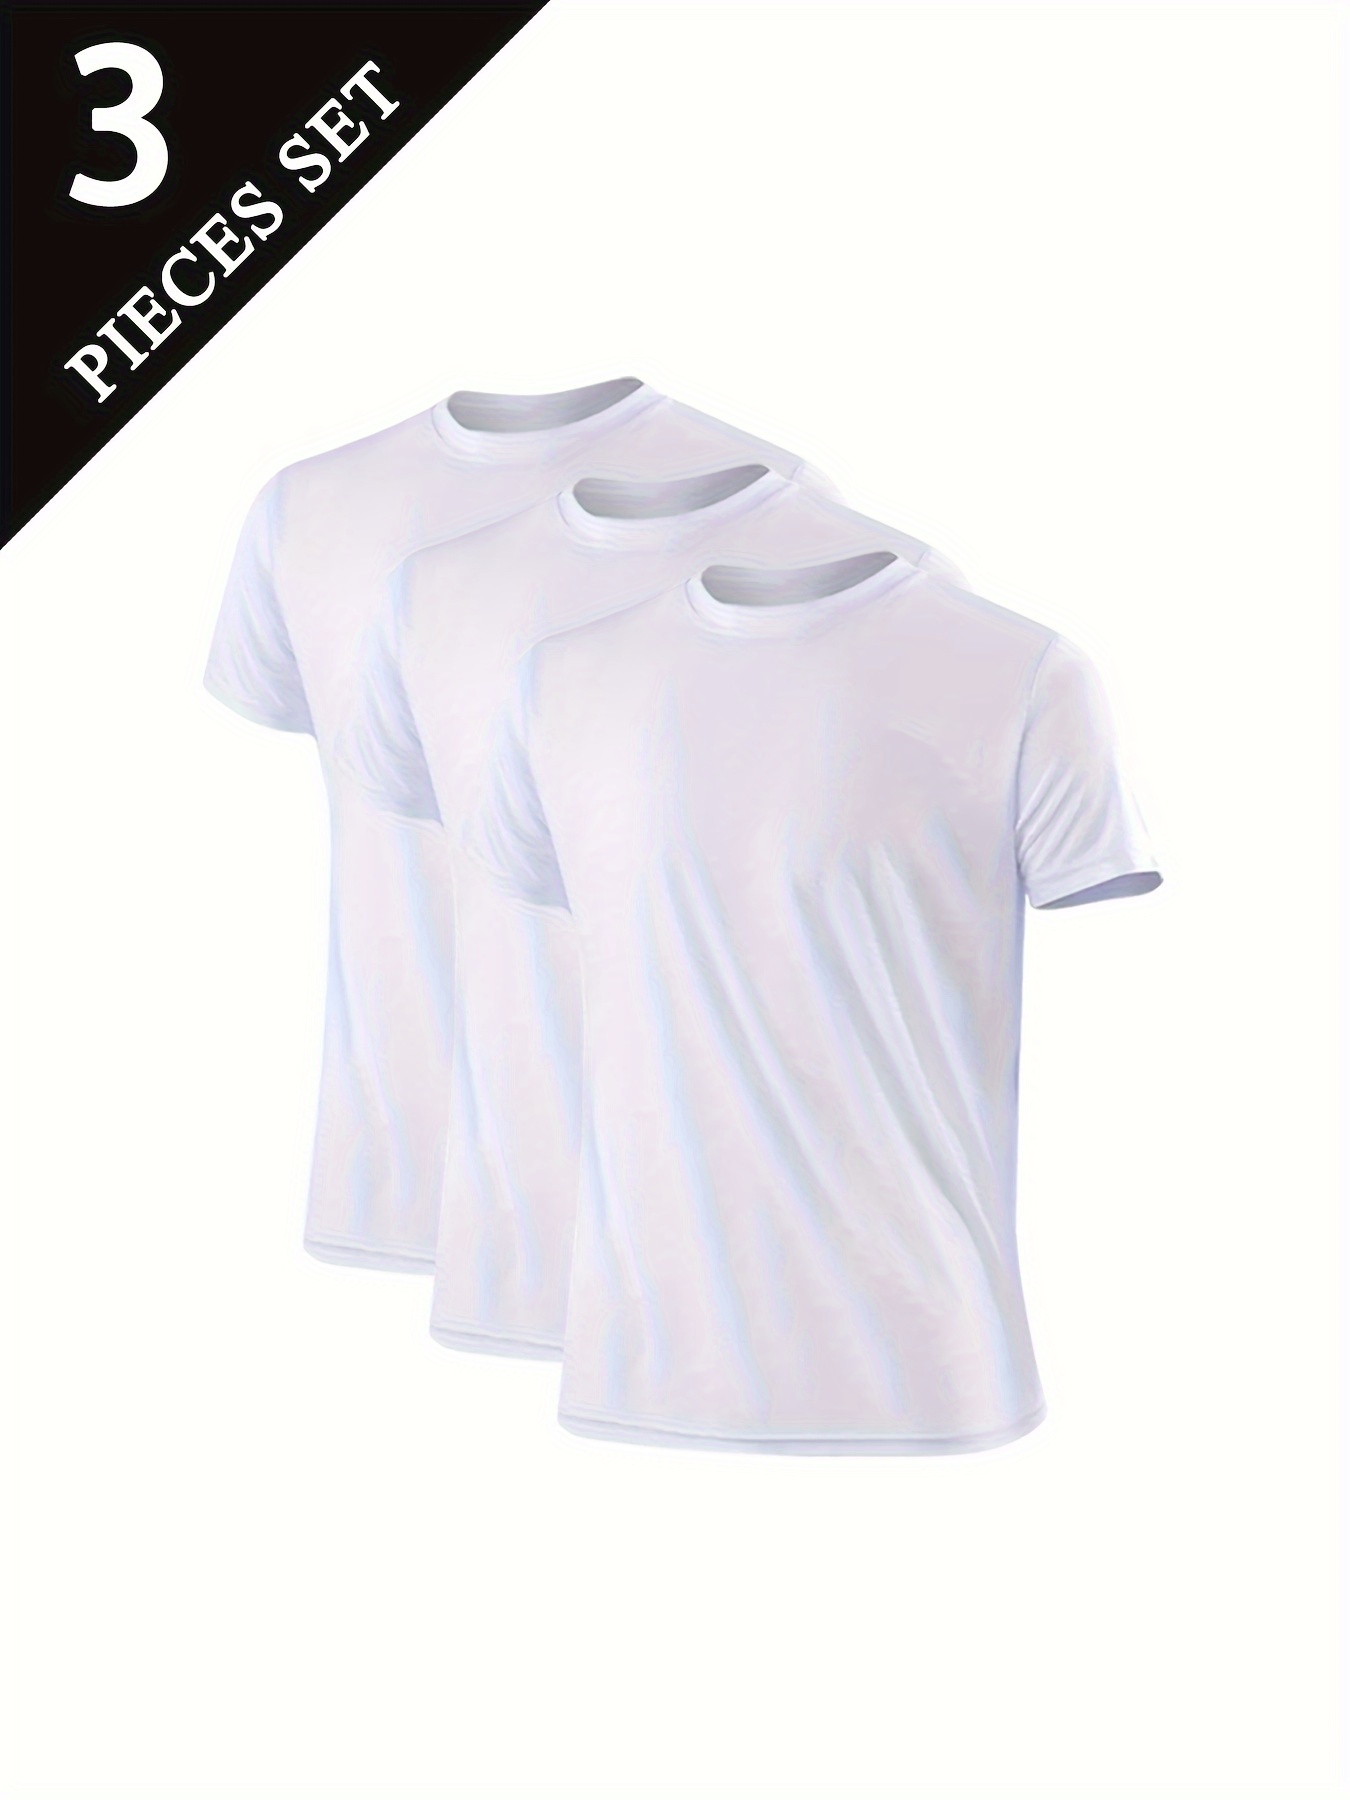 Shop Psyche Basketball Compression Shirt with great discounts and